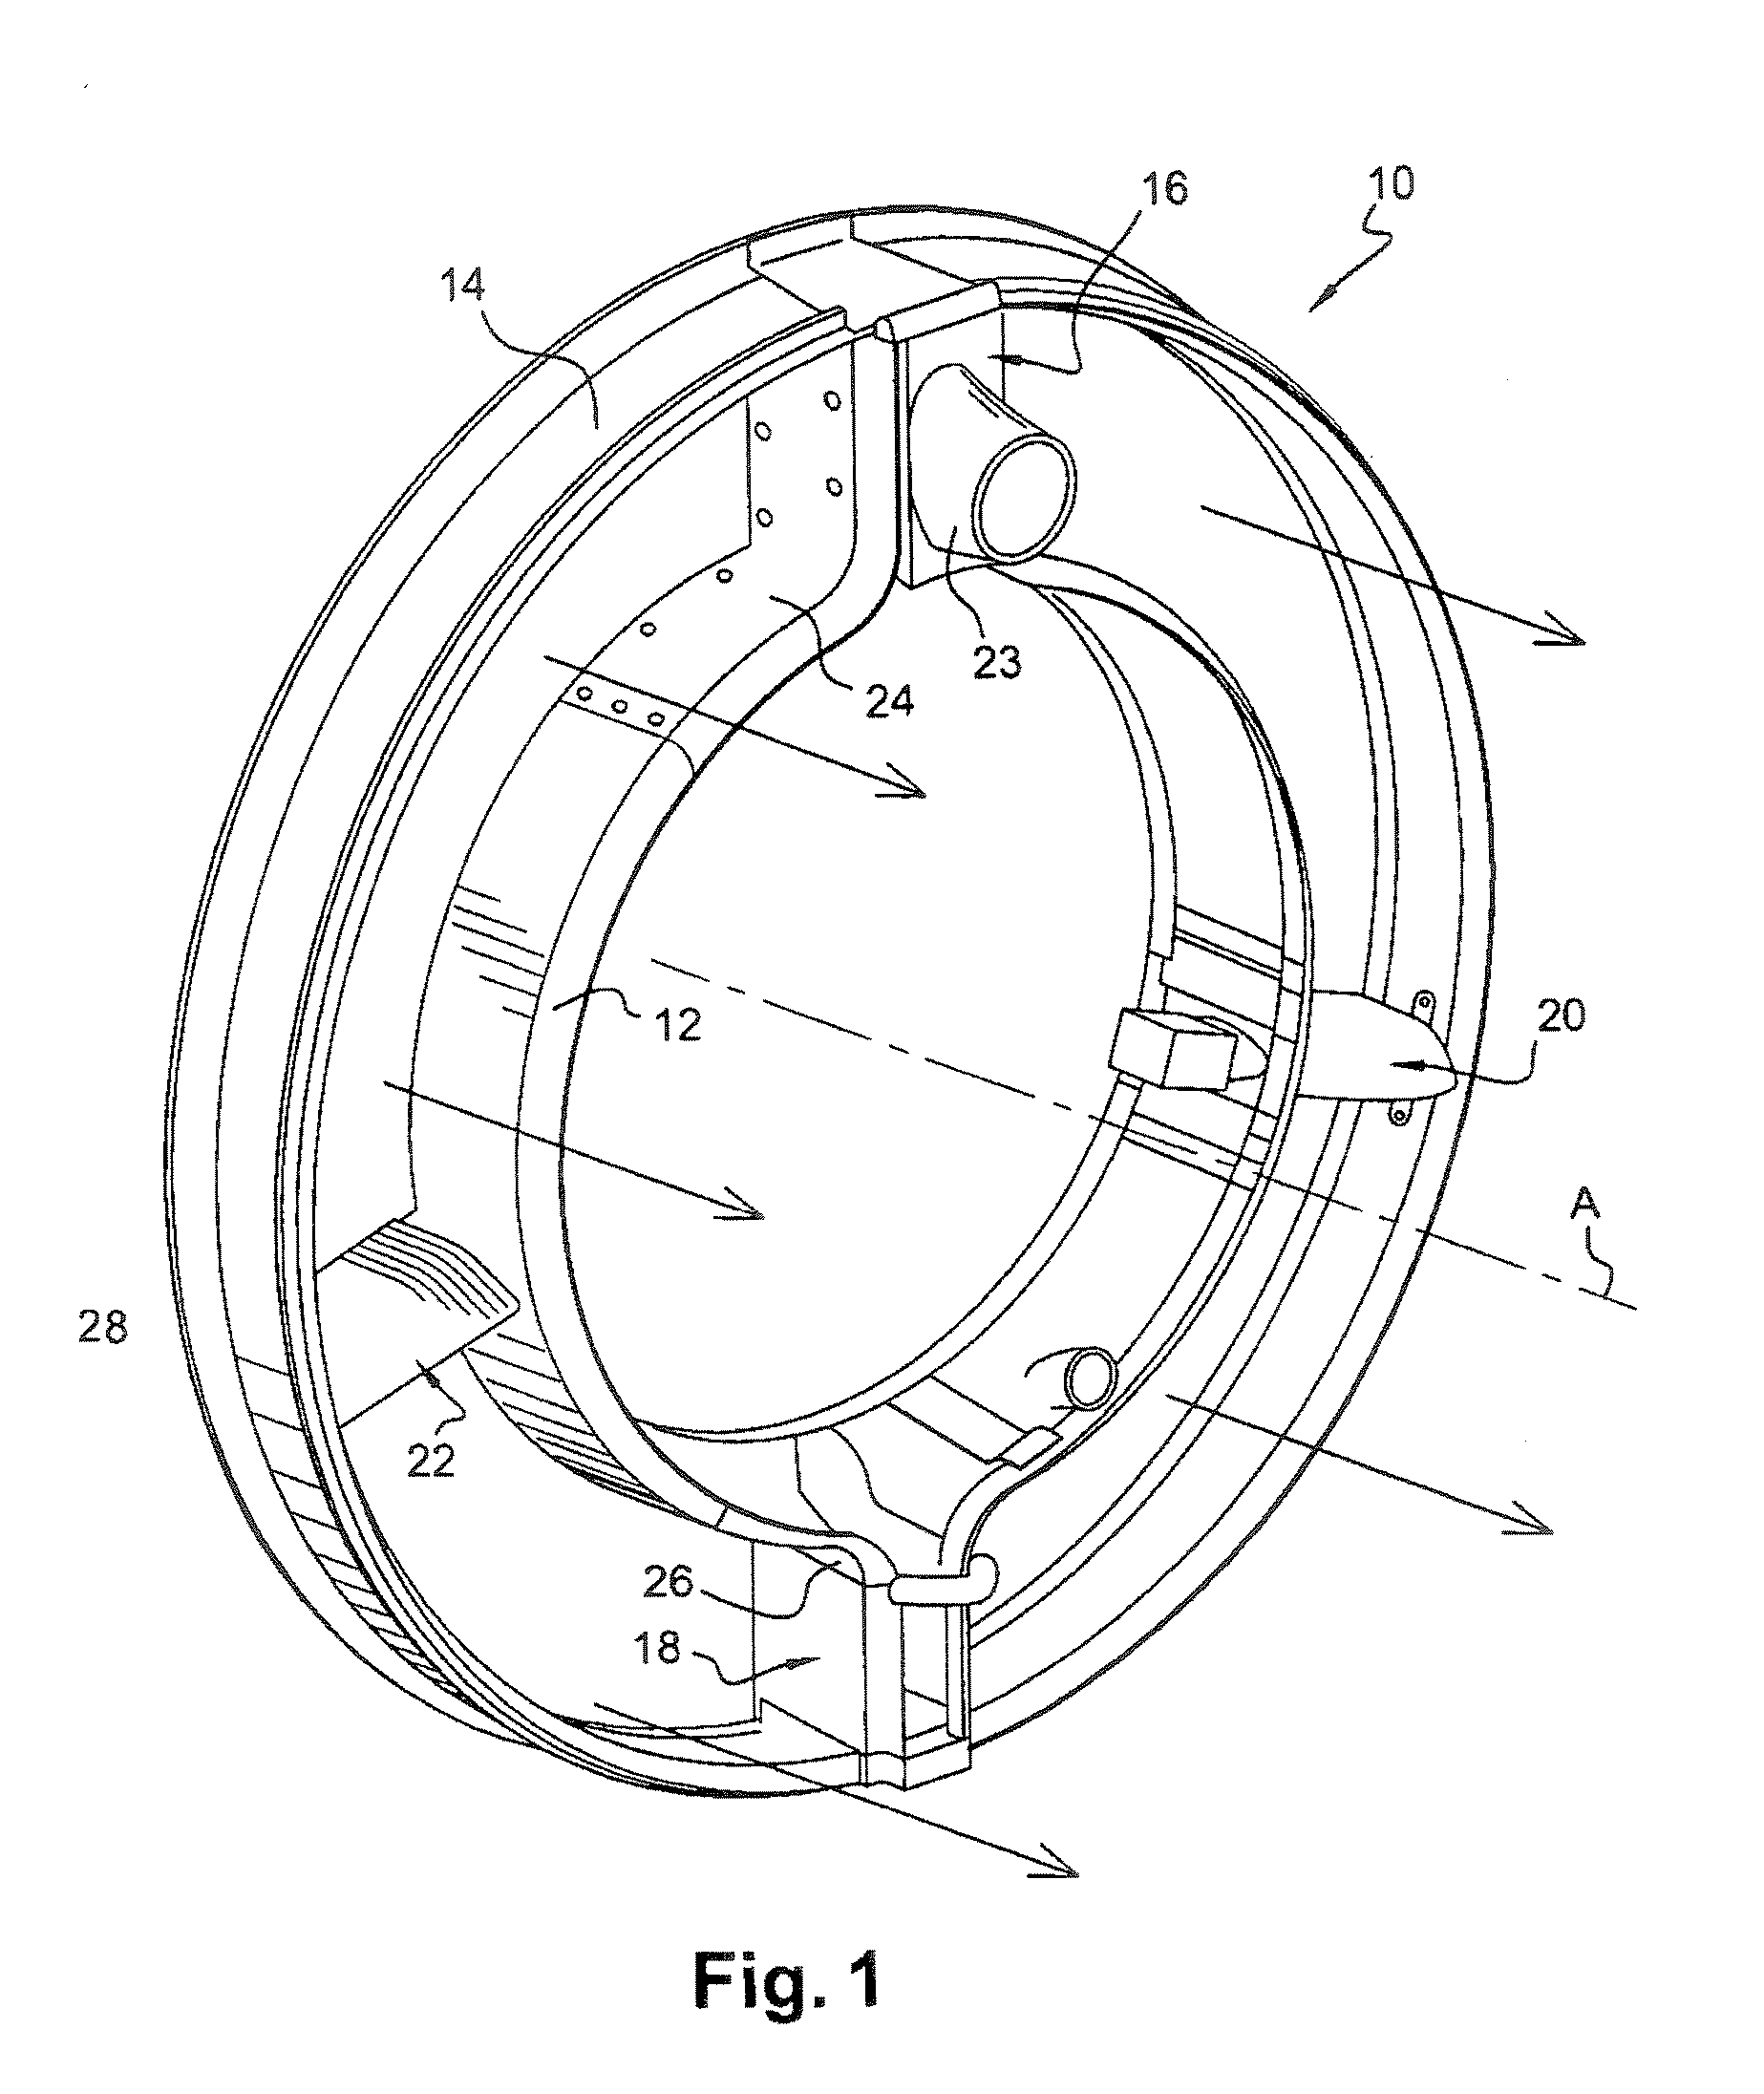 Device for supporting and housing auxiliaries in a bypass turbojet